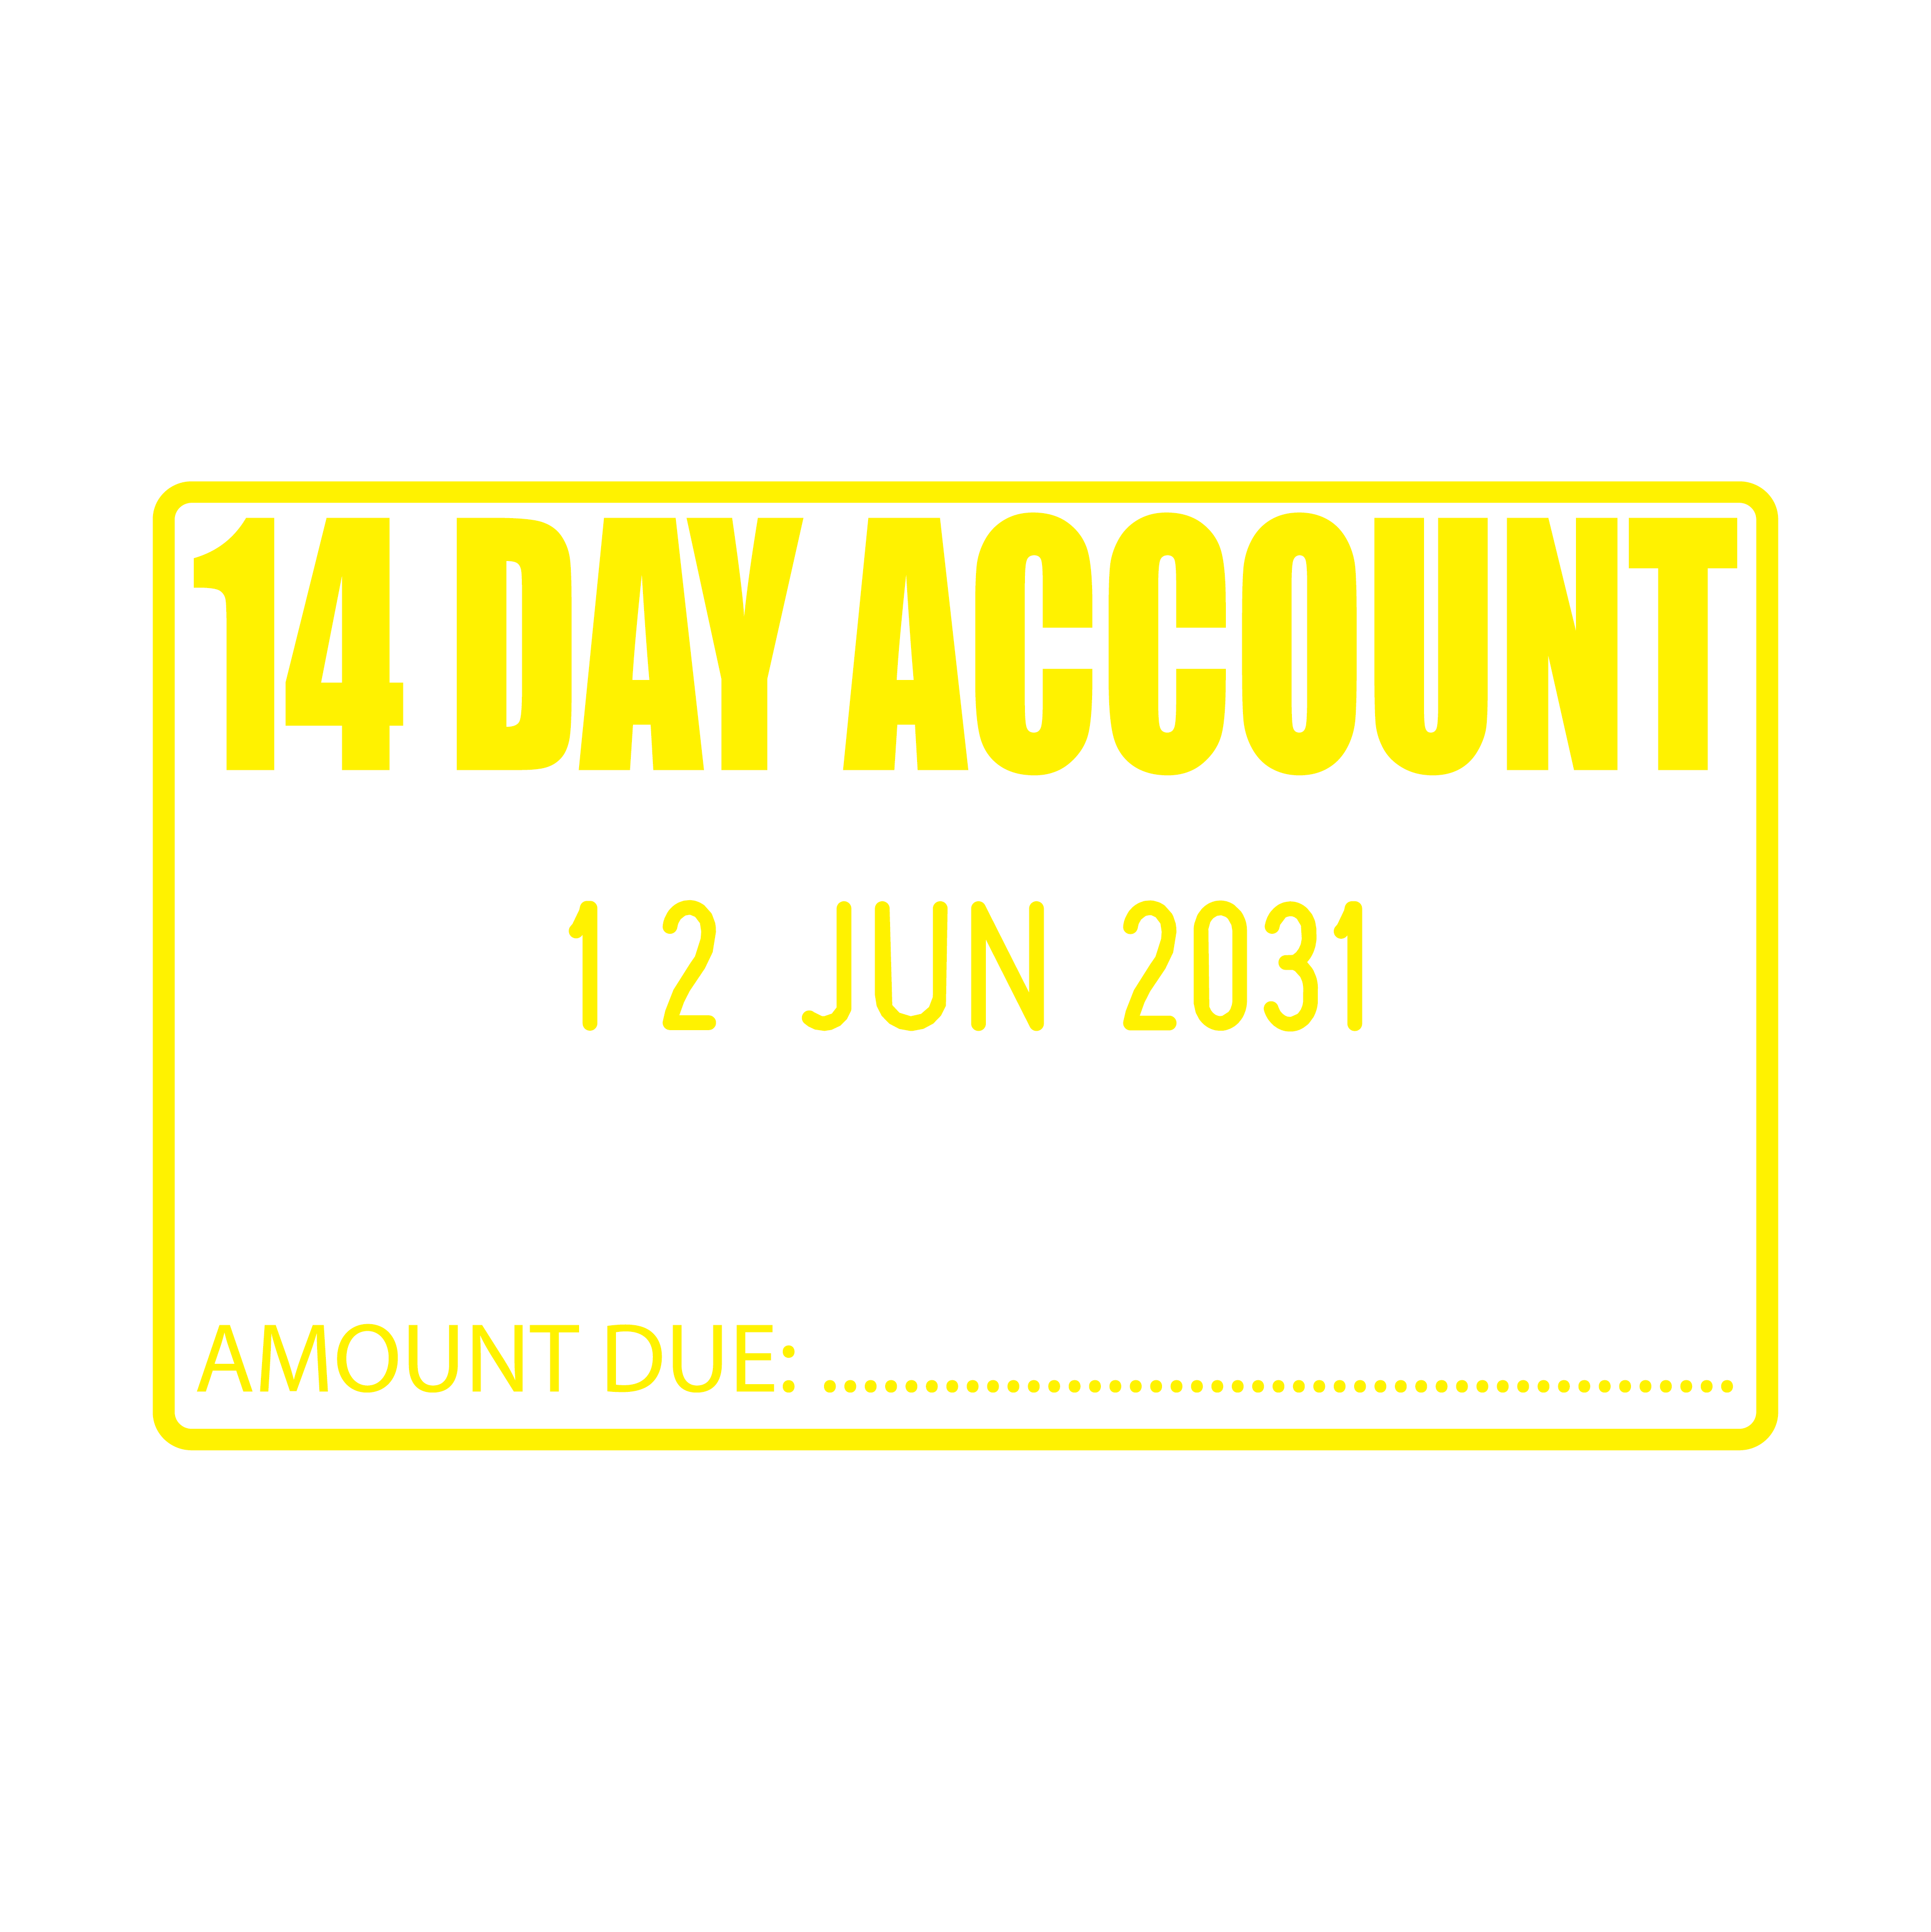 14 Day Account date stamp design